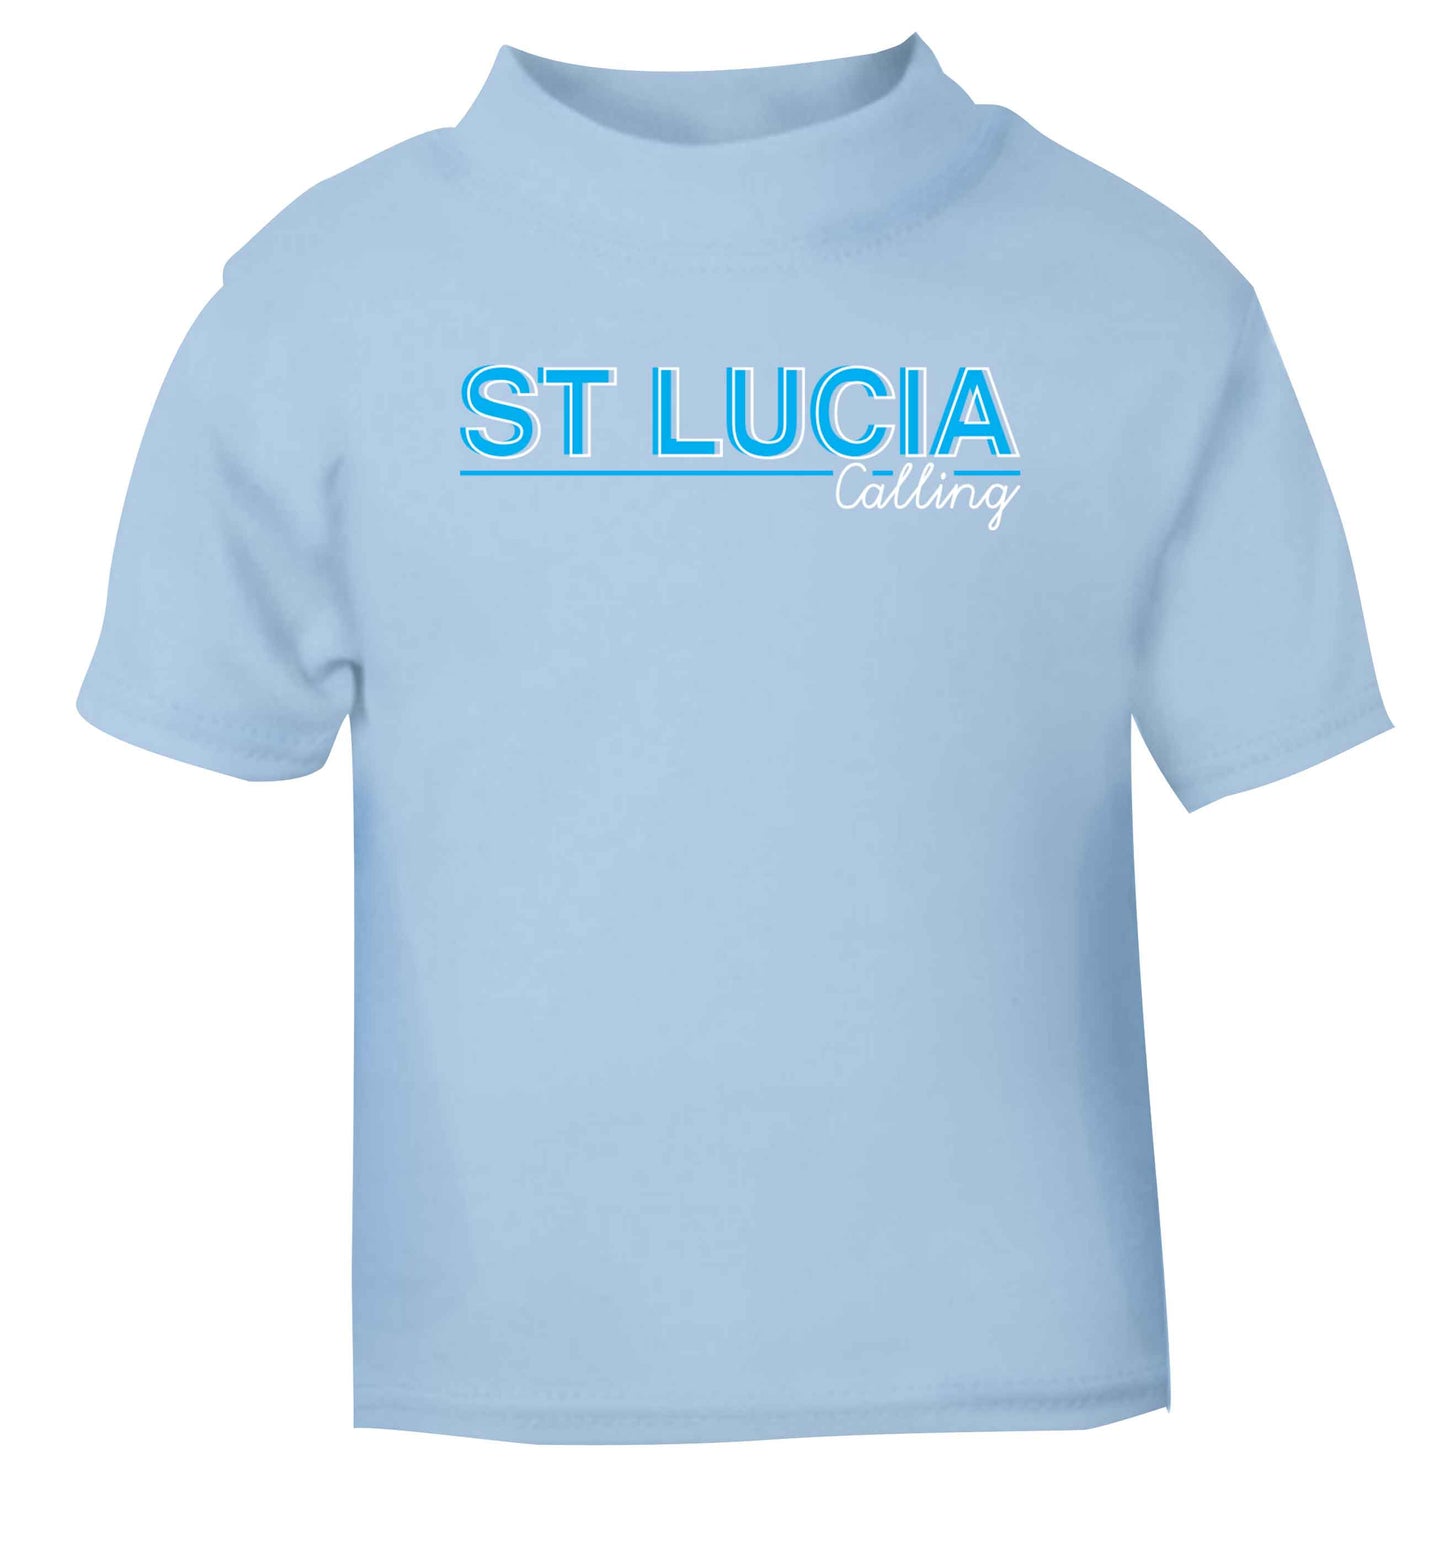 St Lucia calling light blue Baby Toddler Tshirt 2 Years